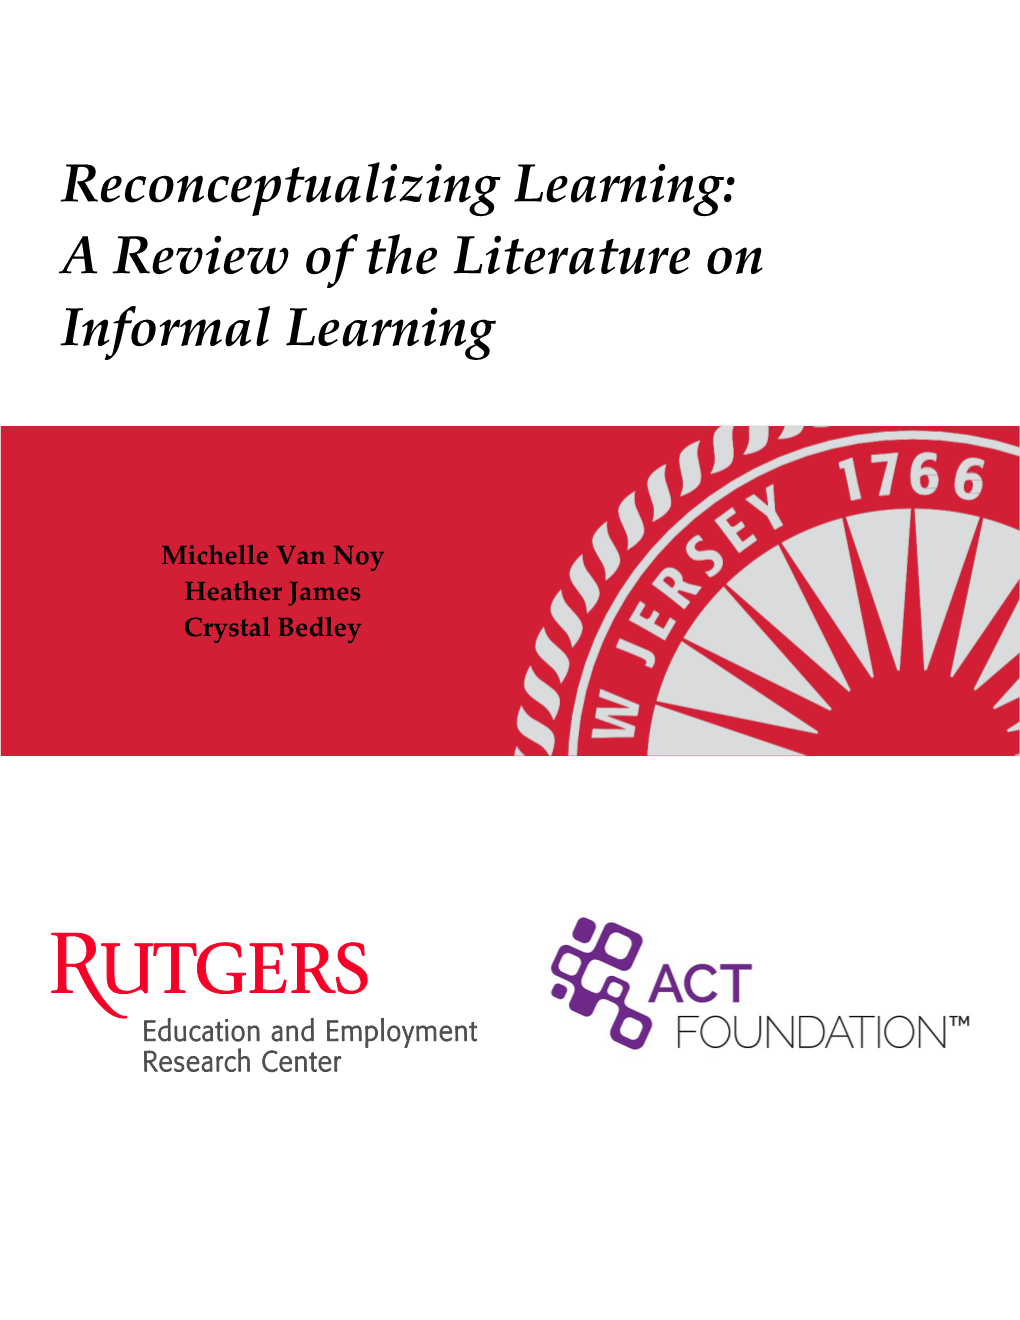 Reconceptualizing Learning: a Review of the Literature on Informal Learning